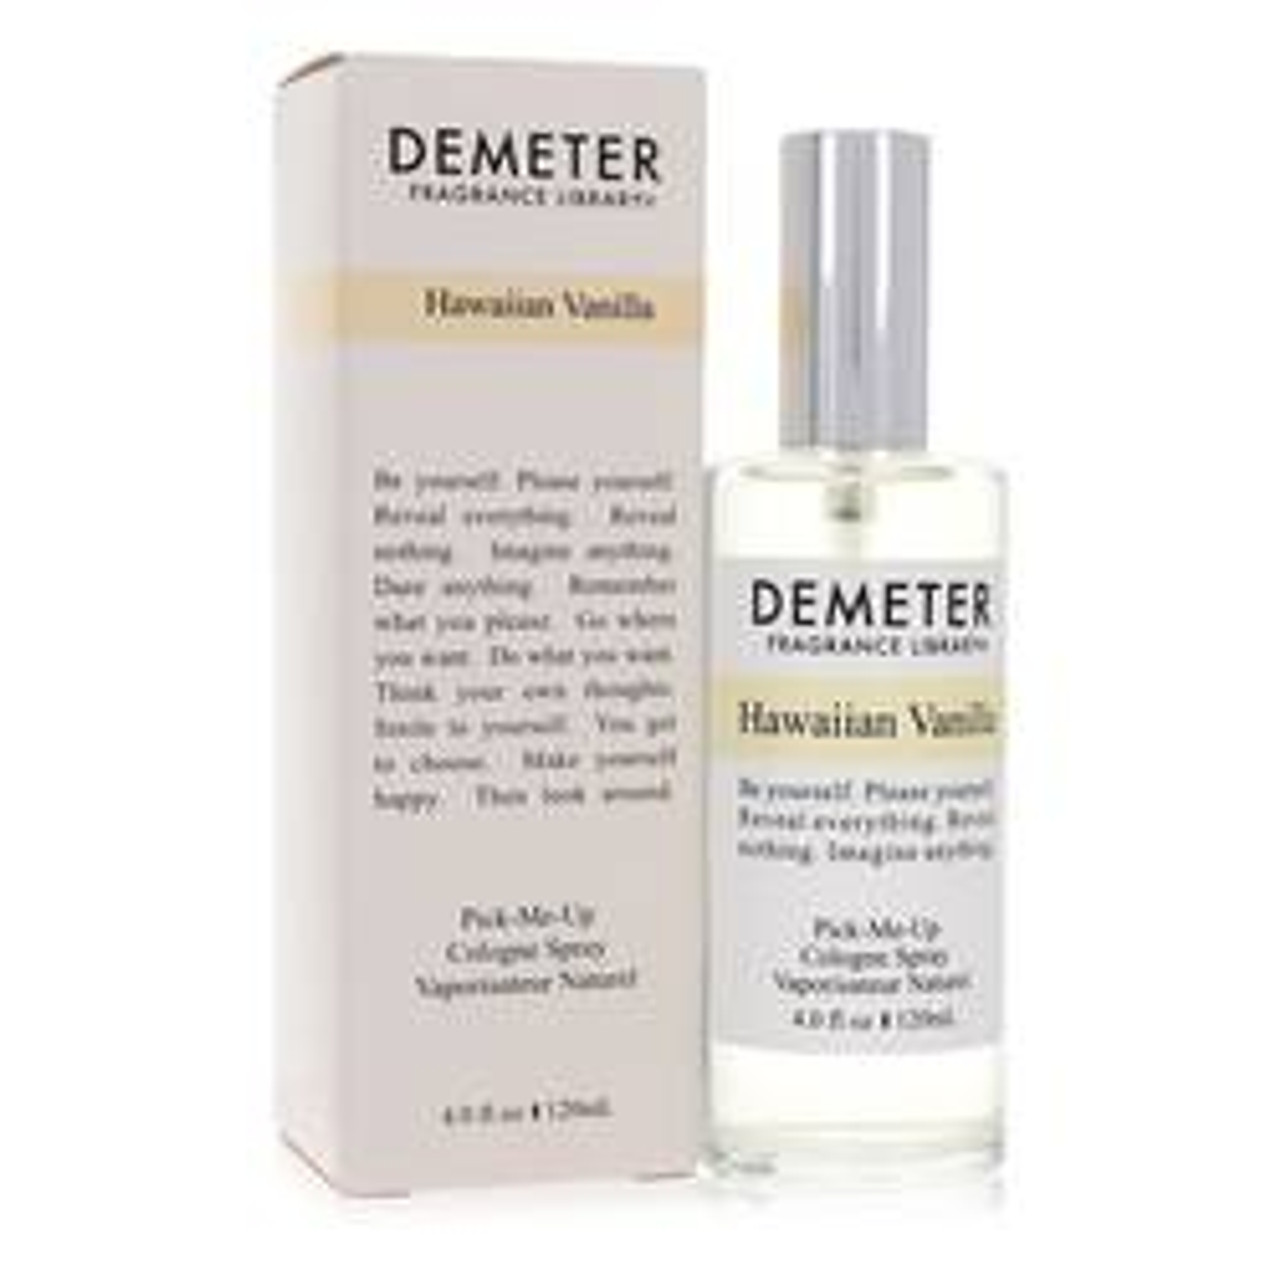 Demeter Hawaiian Vanilla Perfume By Demeter Cologne Spray 4 oz for Women - [From 79.50 - Choose pk Qty ] - *Ships from Miami